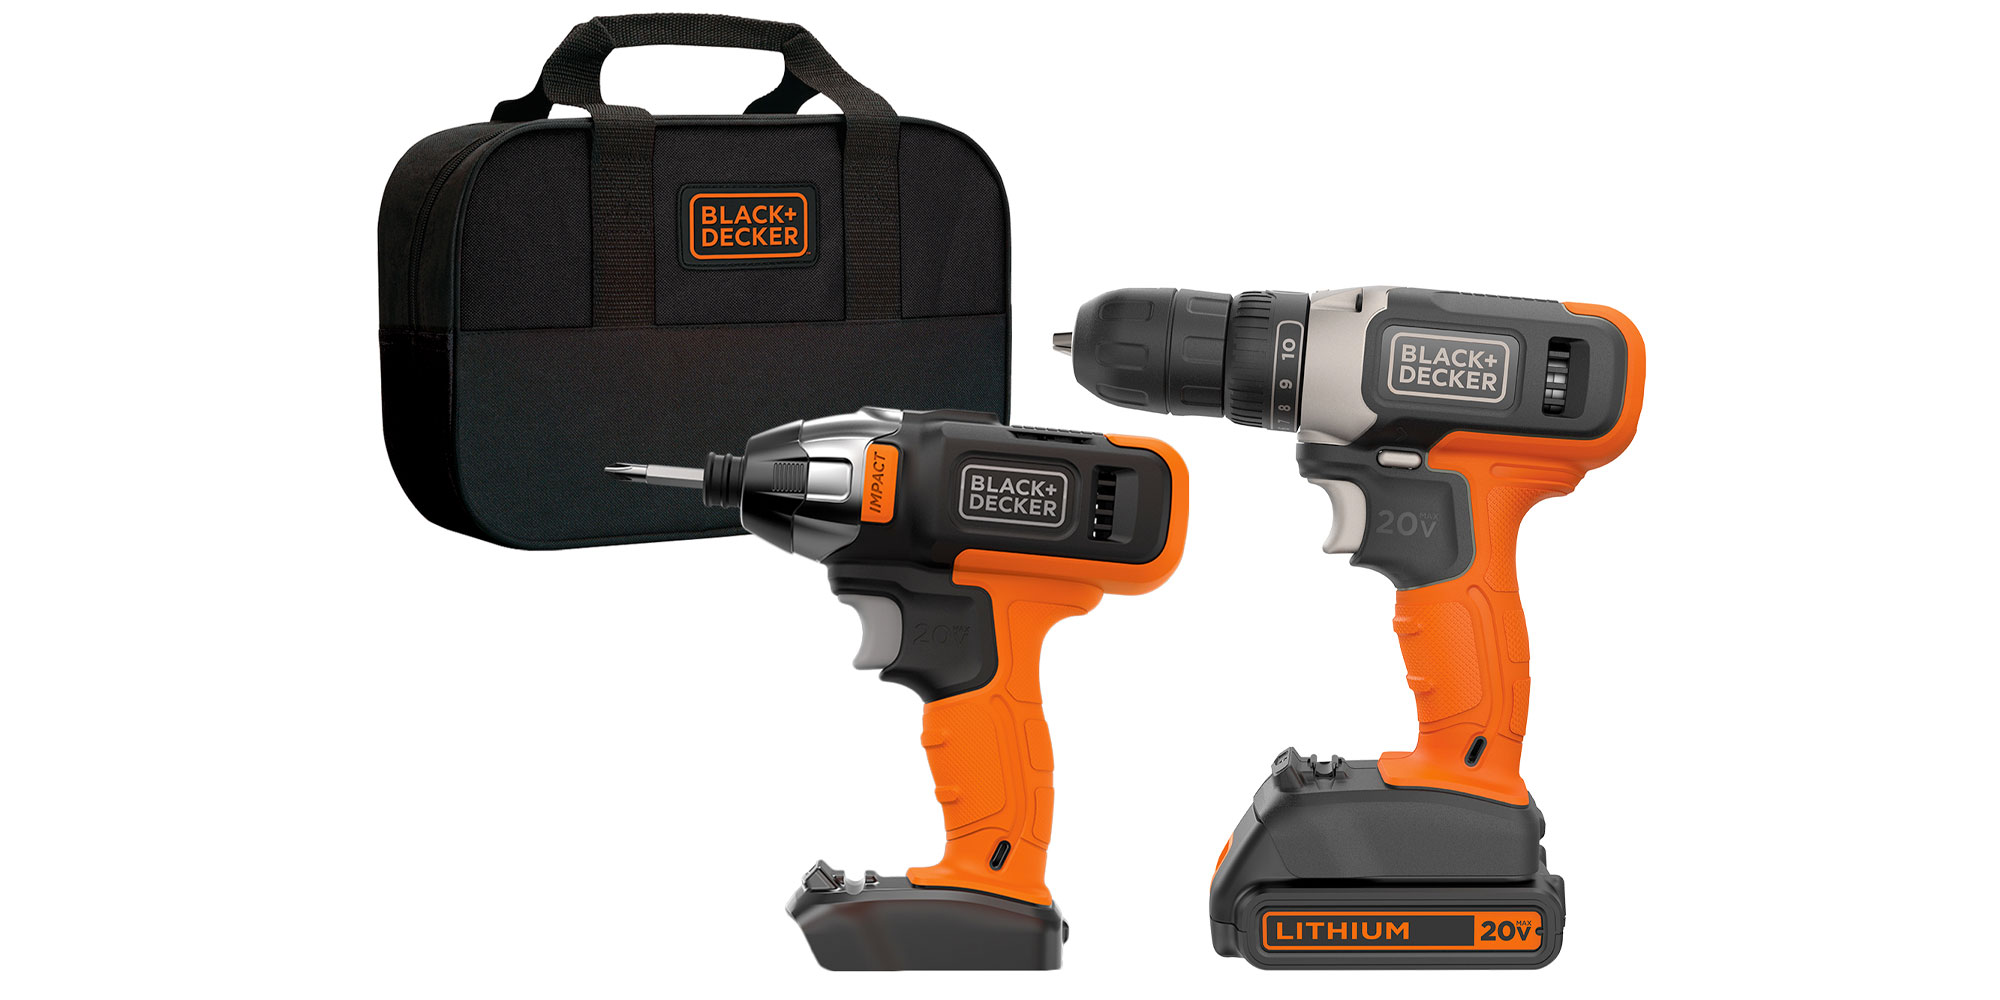 Begin your DIY journey with BLACK+DECKER's 2-tool combo kit at $50